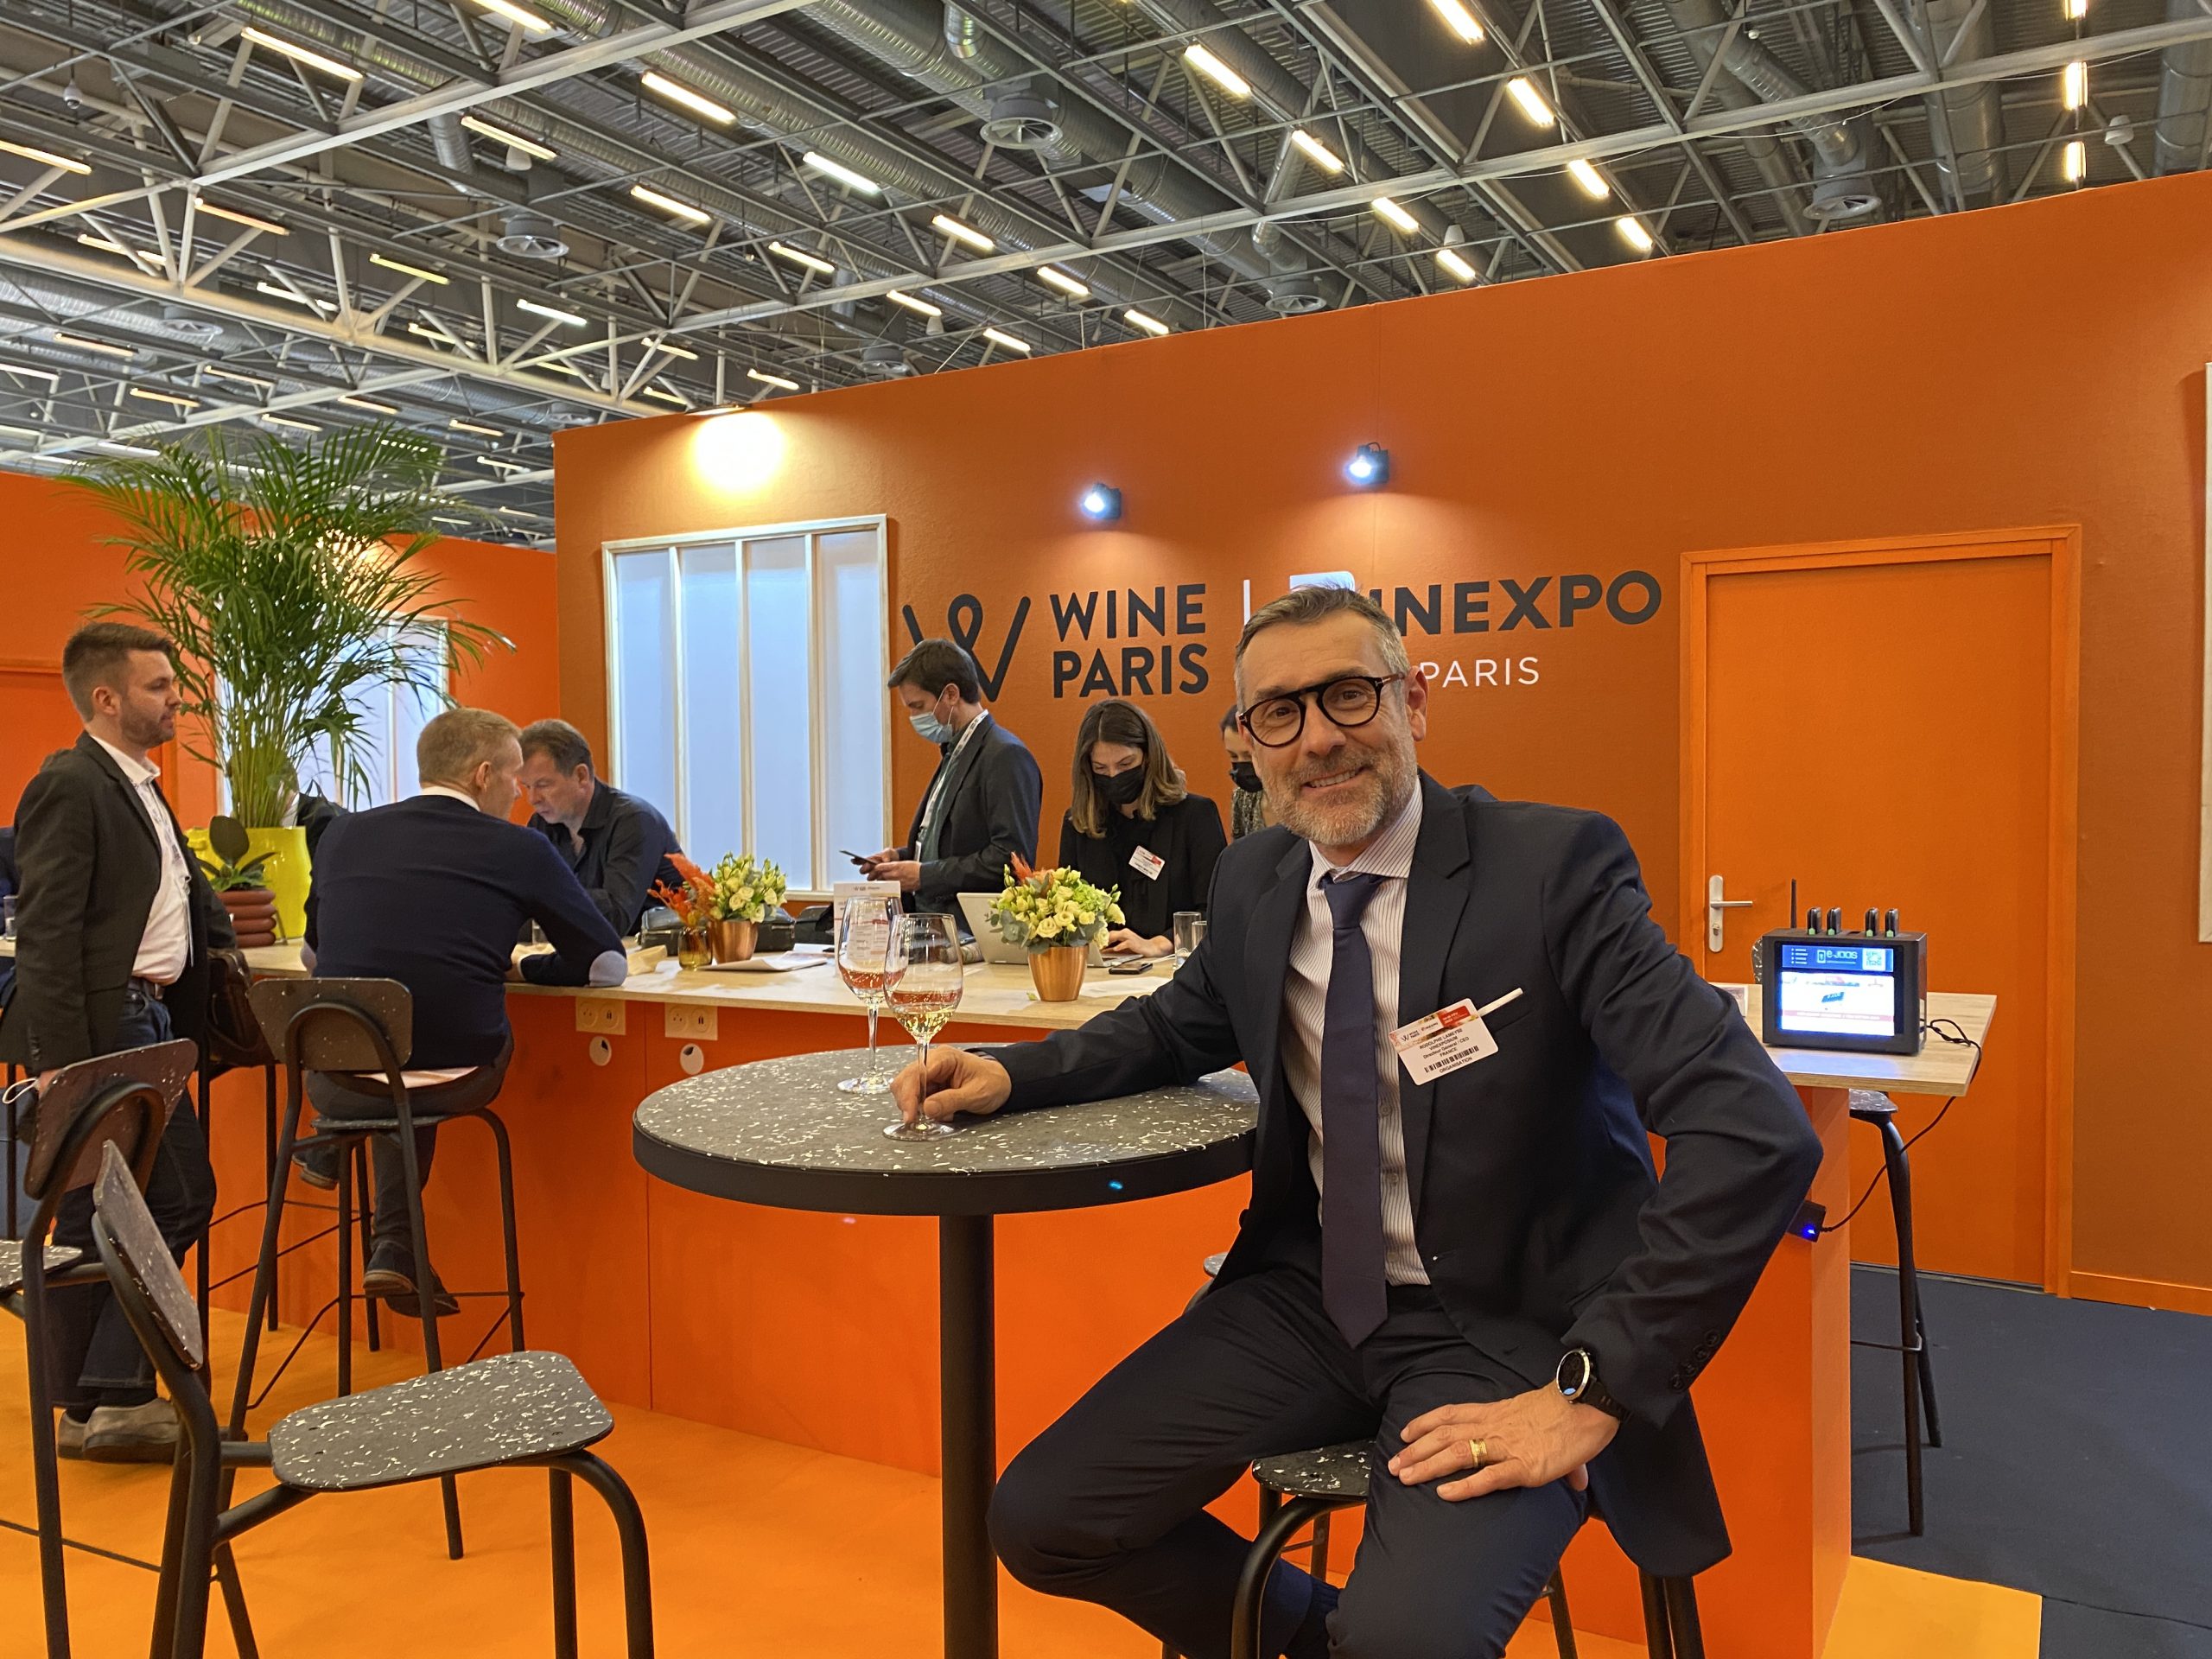 first major trade show in two years comes to successful end with Vinexpo Paris